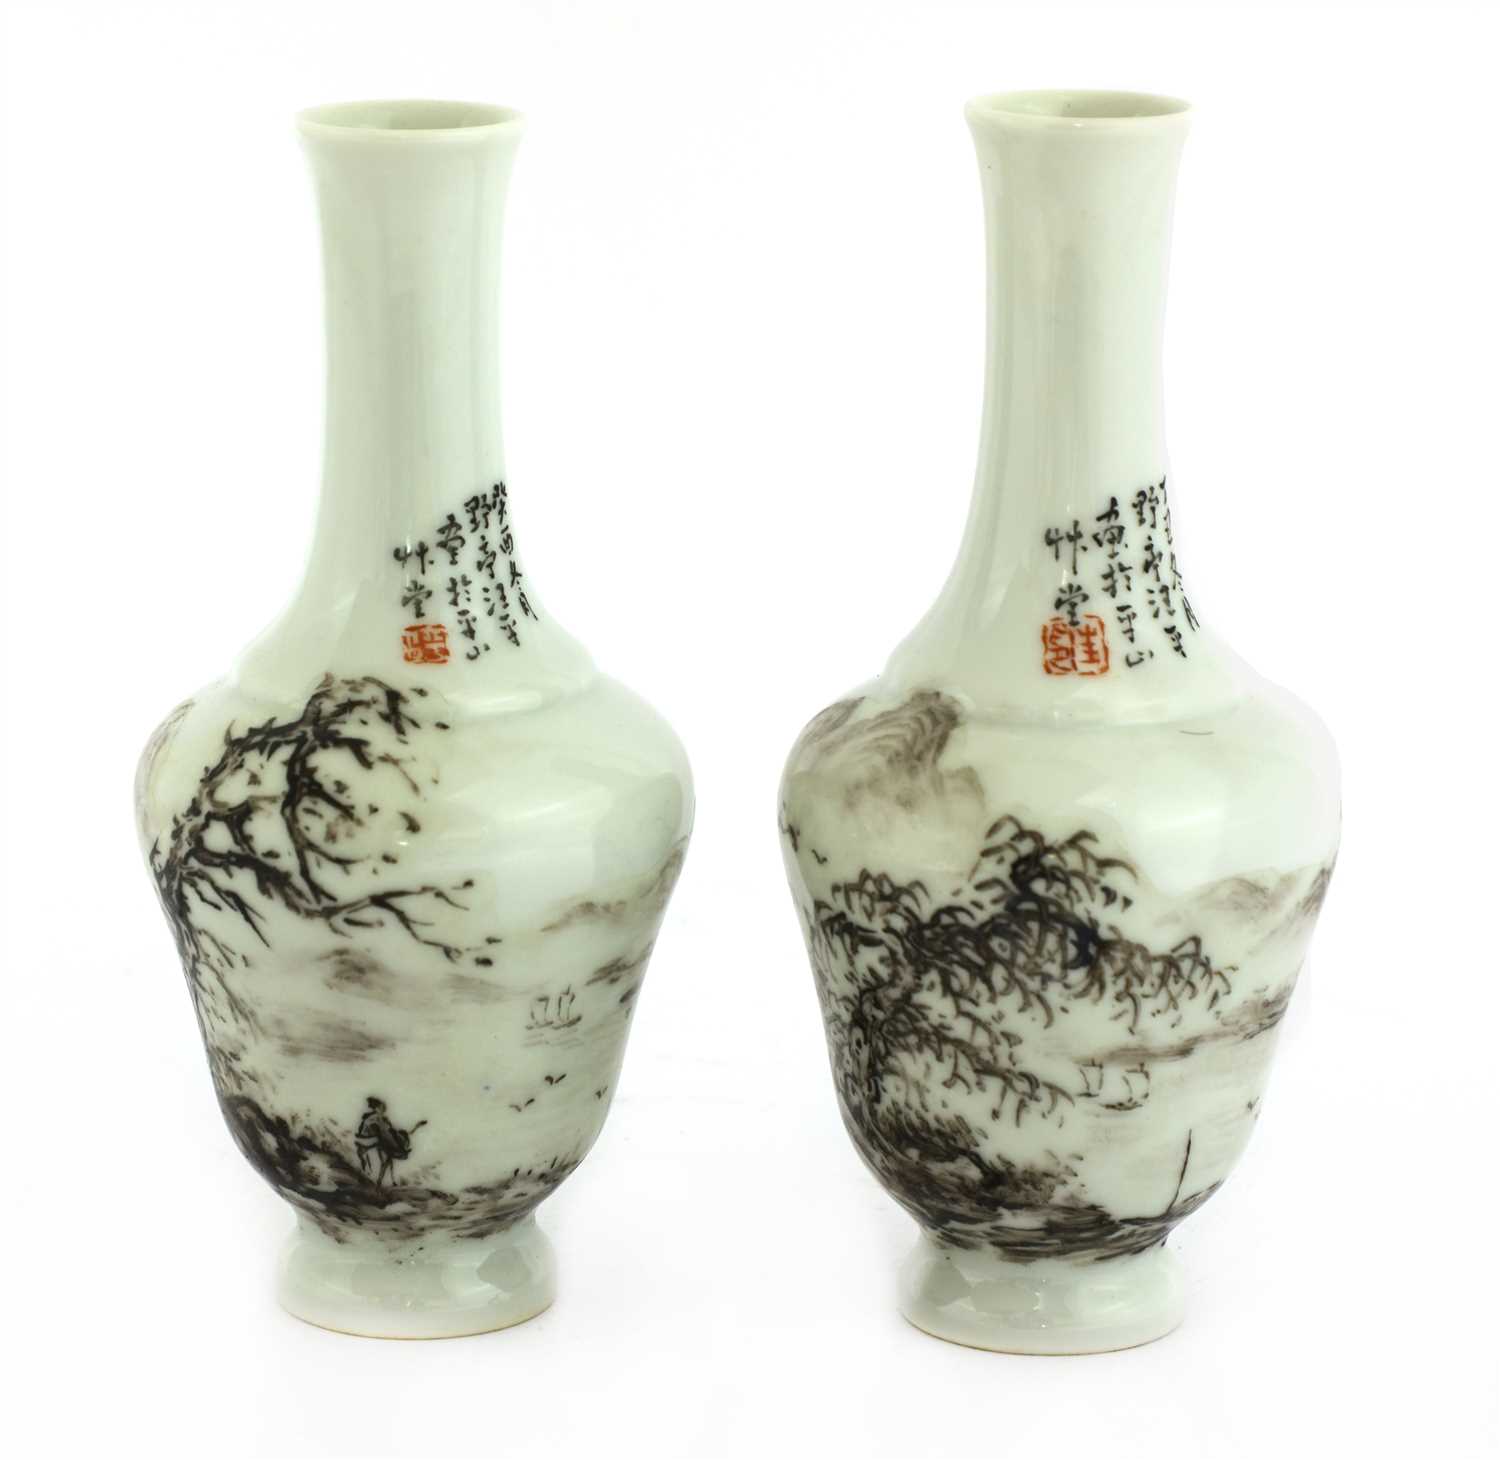 Lot 301 - Two Chinese porcelain vases